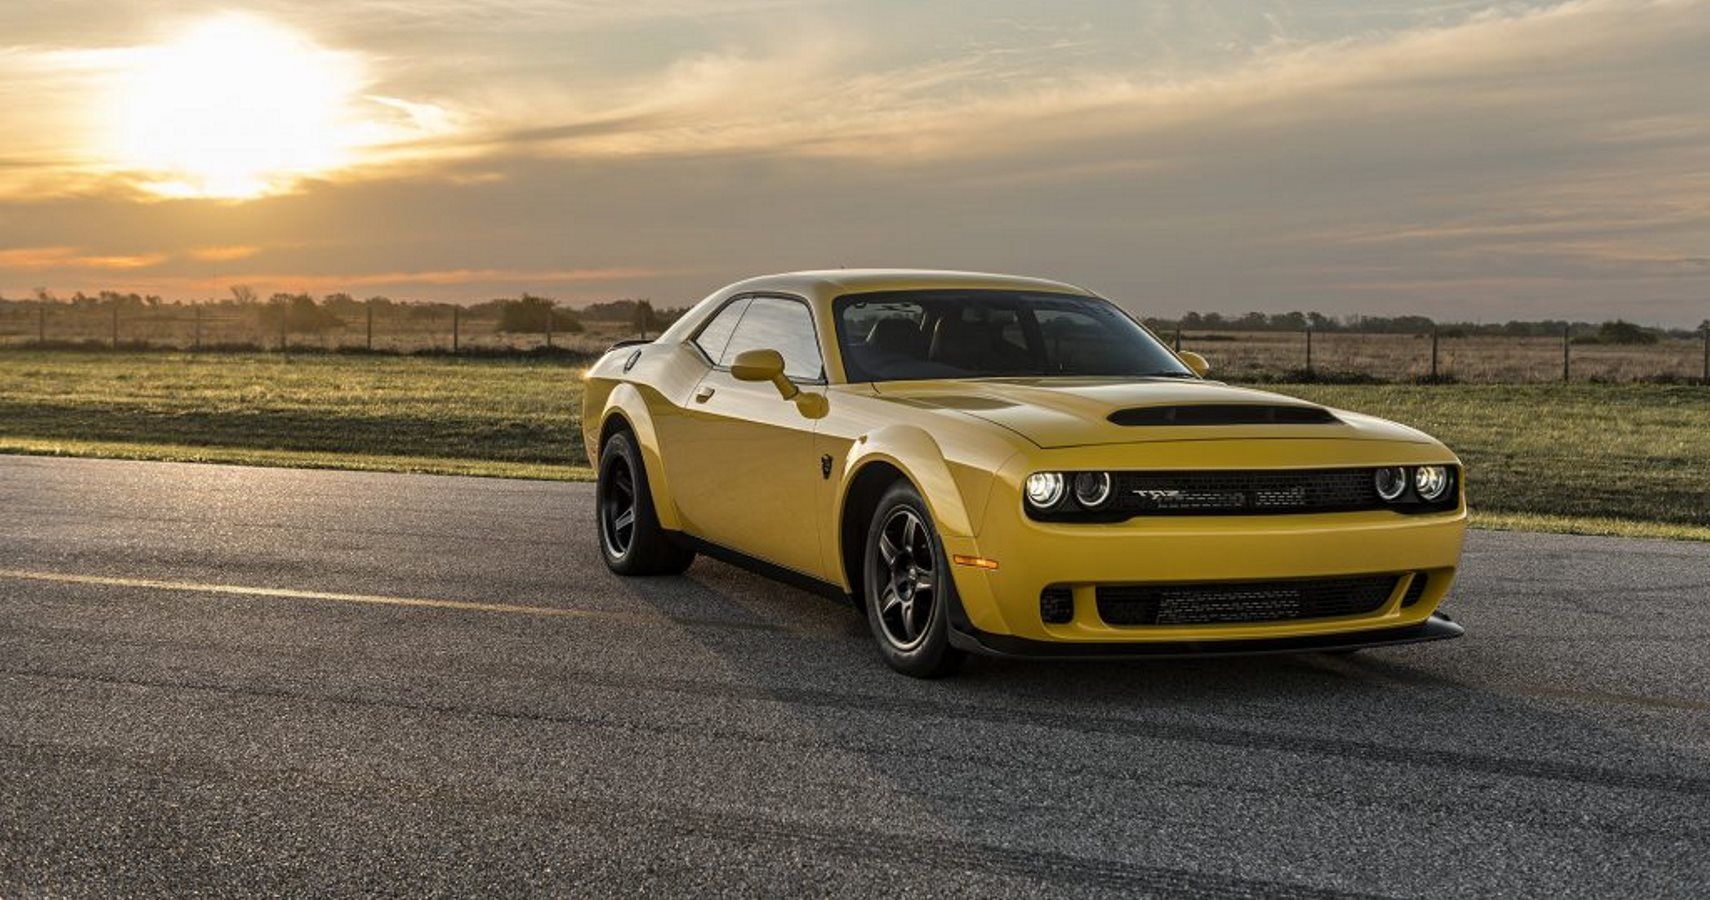 Watch Hennessey Test The Crazy Powerful Dodge Demon Before Handing It Off To Lucky Customer